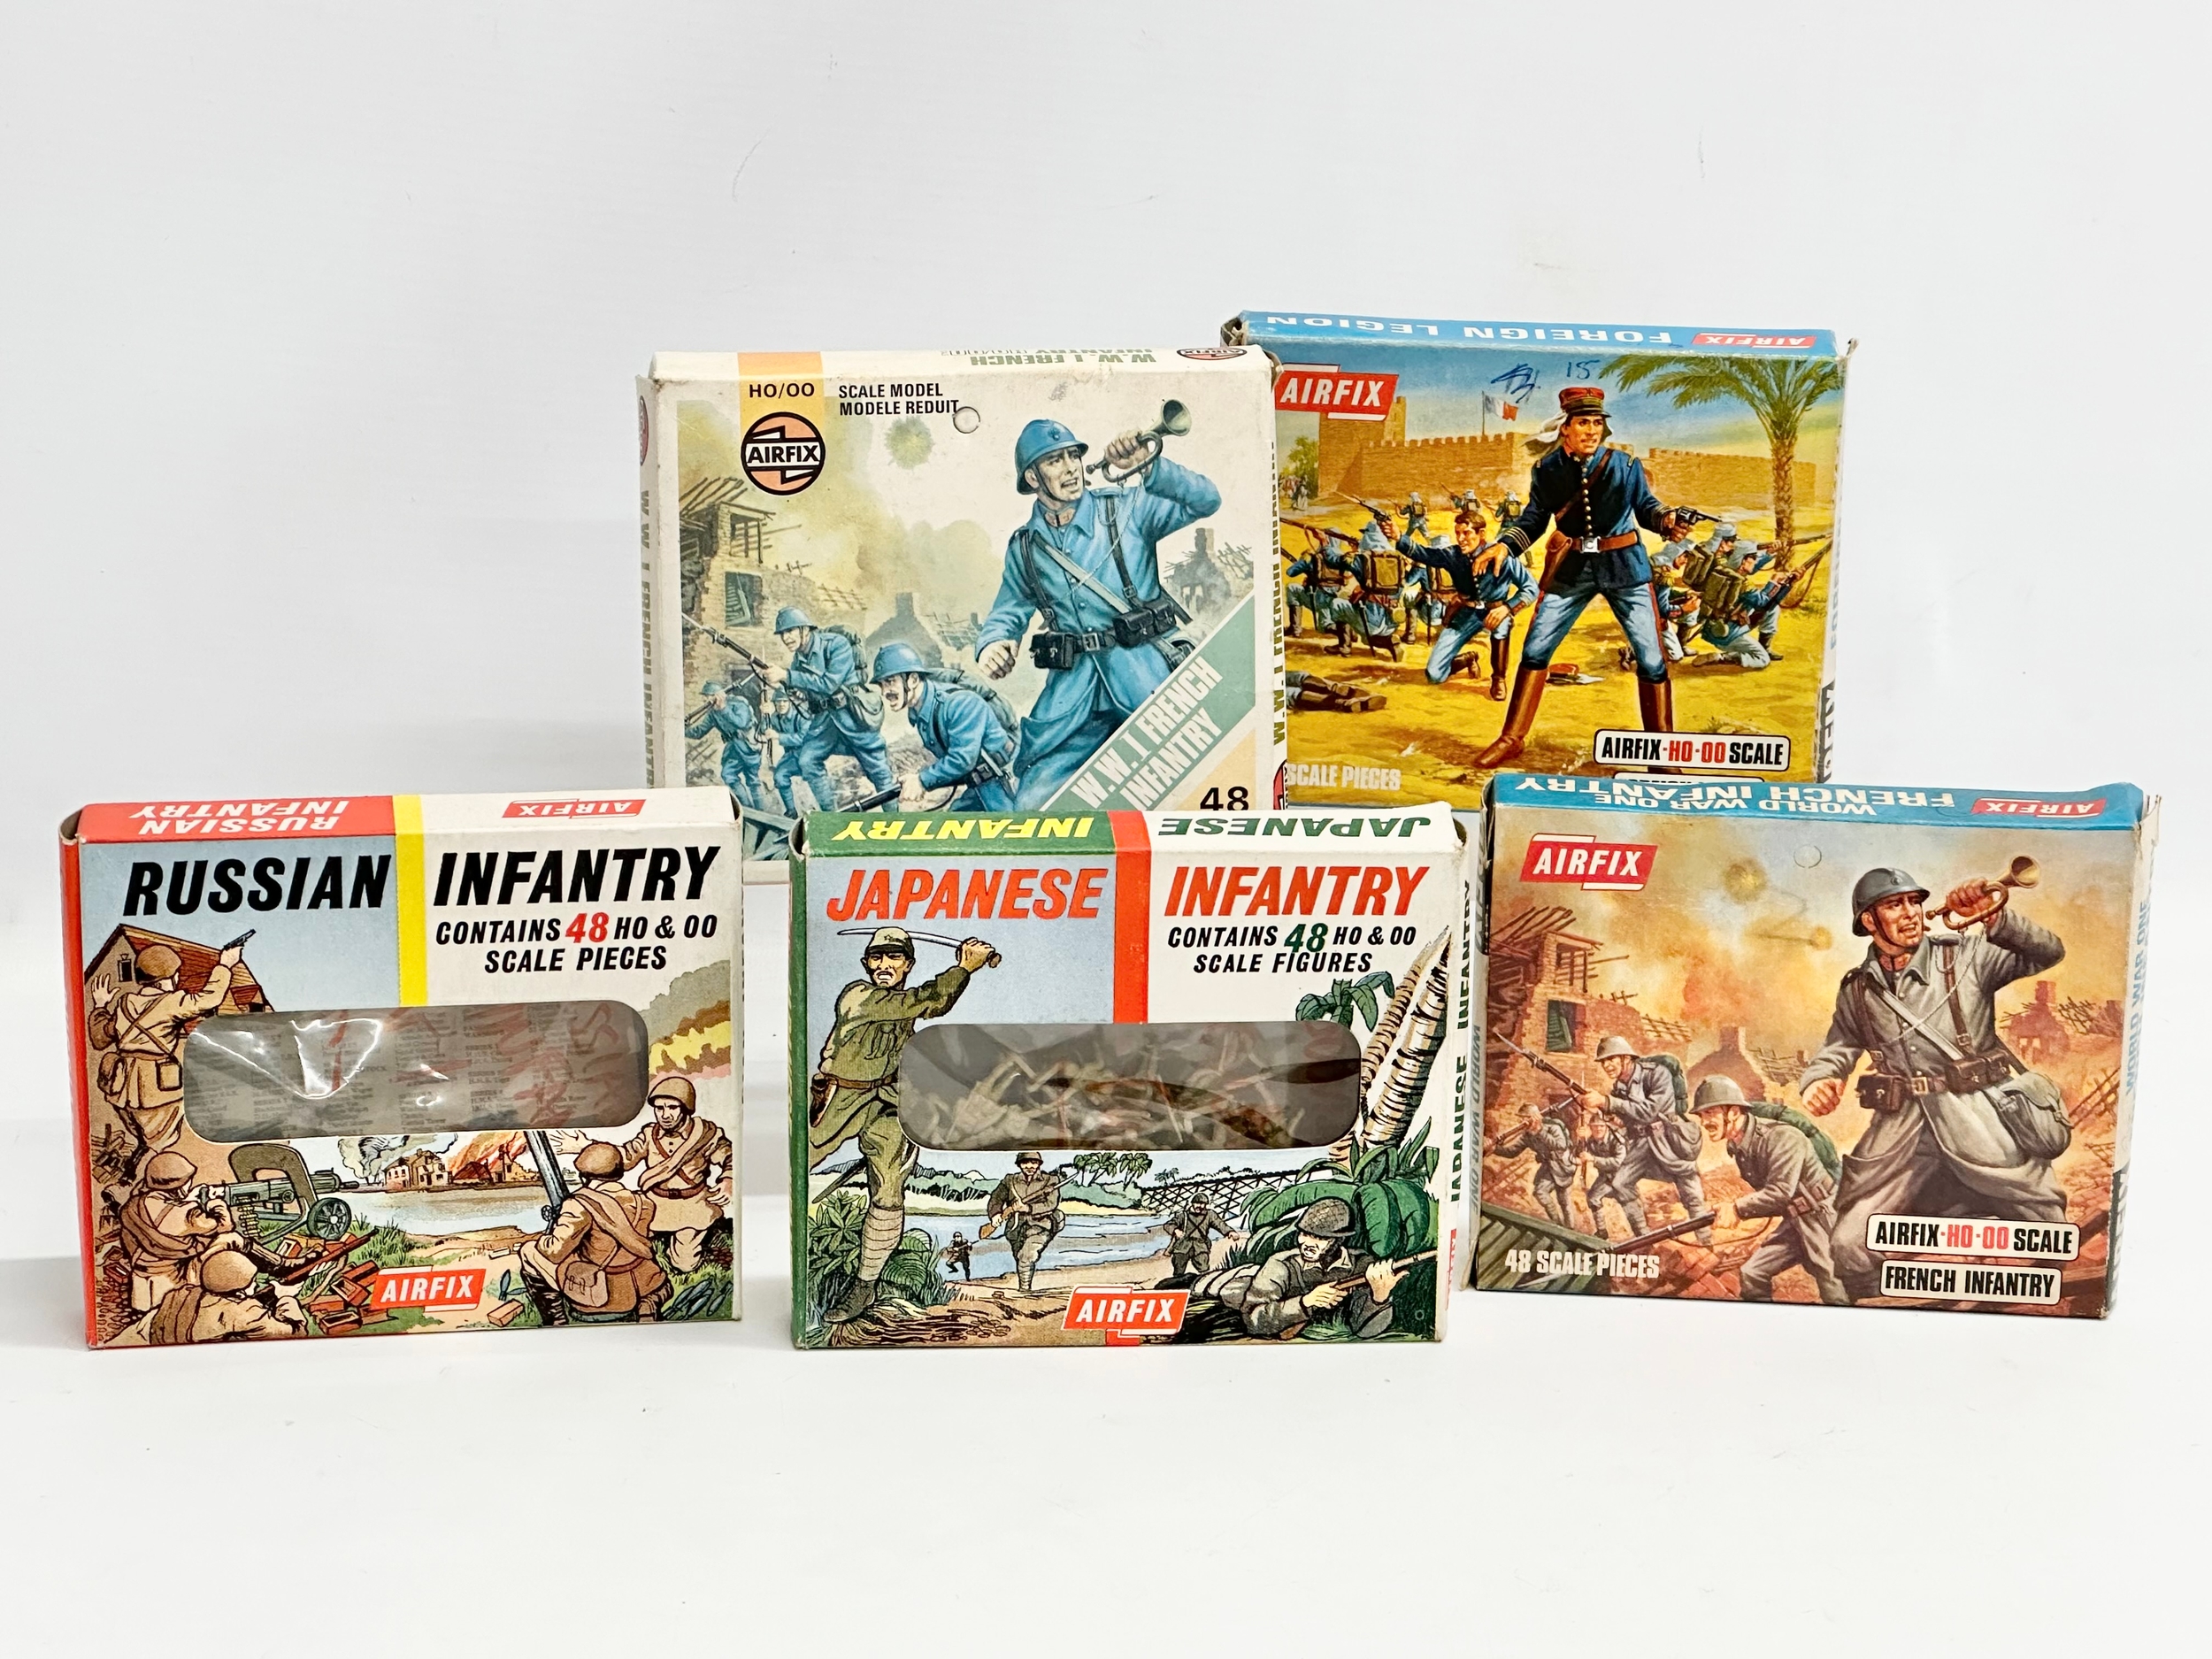 5 boxes of vintage Airfix HO-OO scale soldiers. Airfix Russian Infantry. Airfix Japanese Infantry. 2